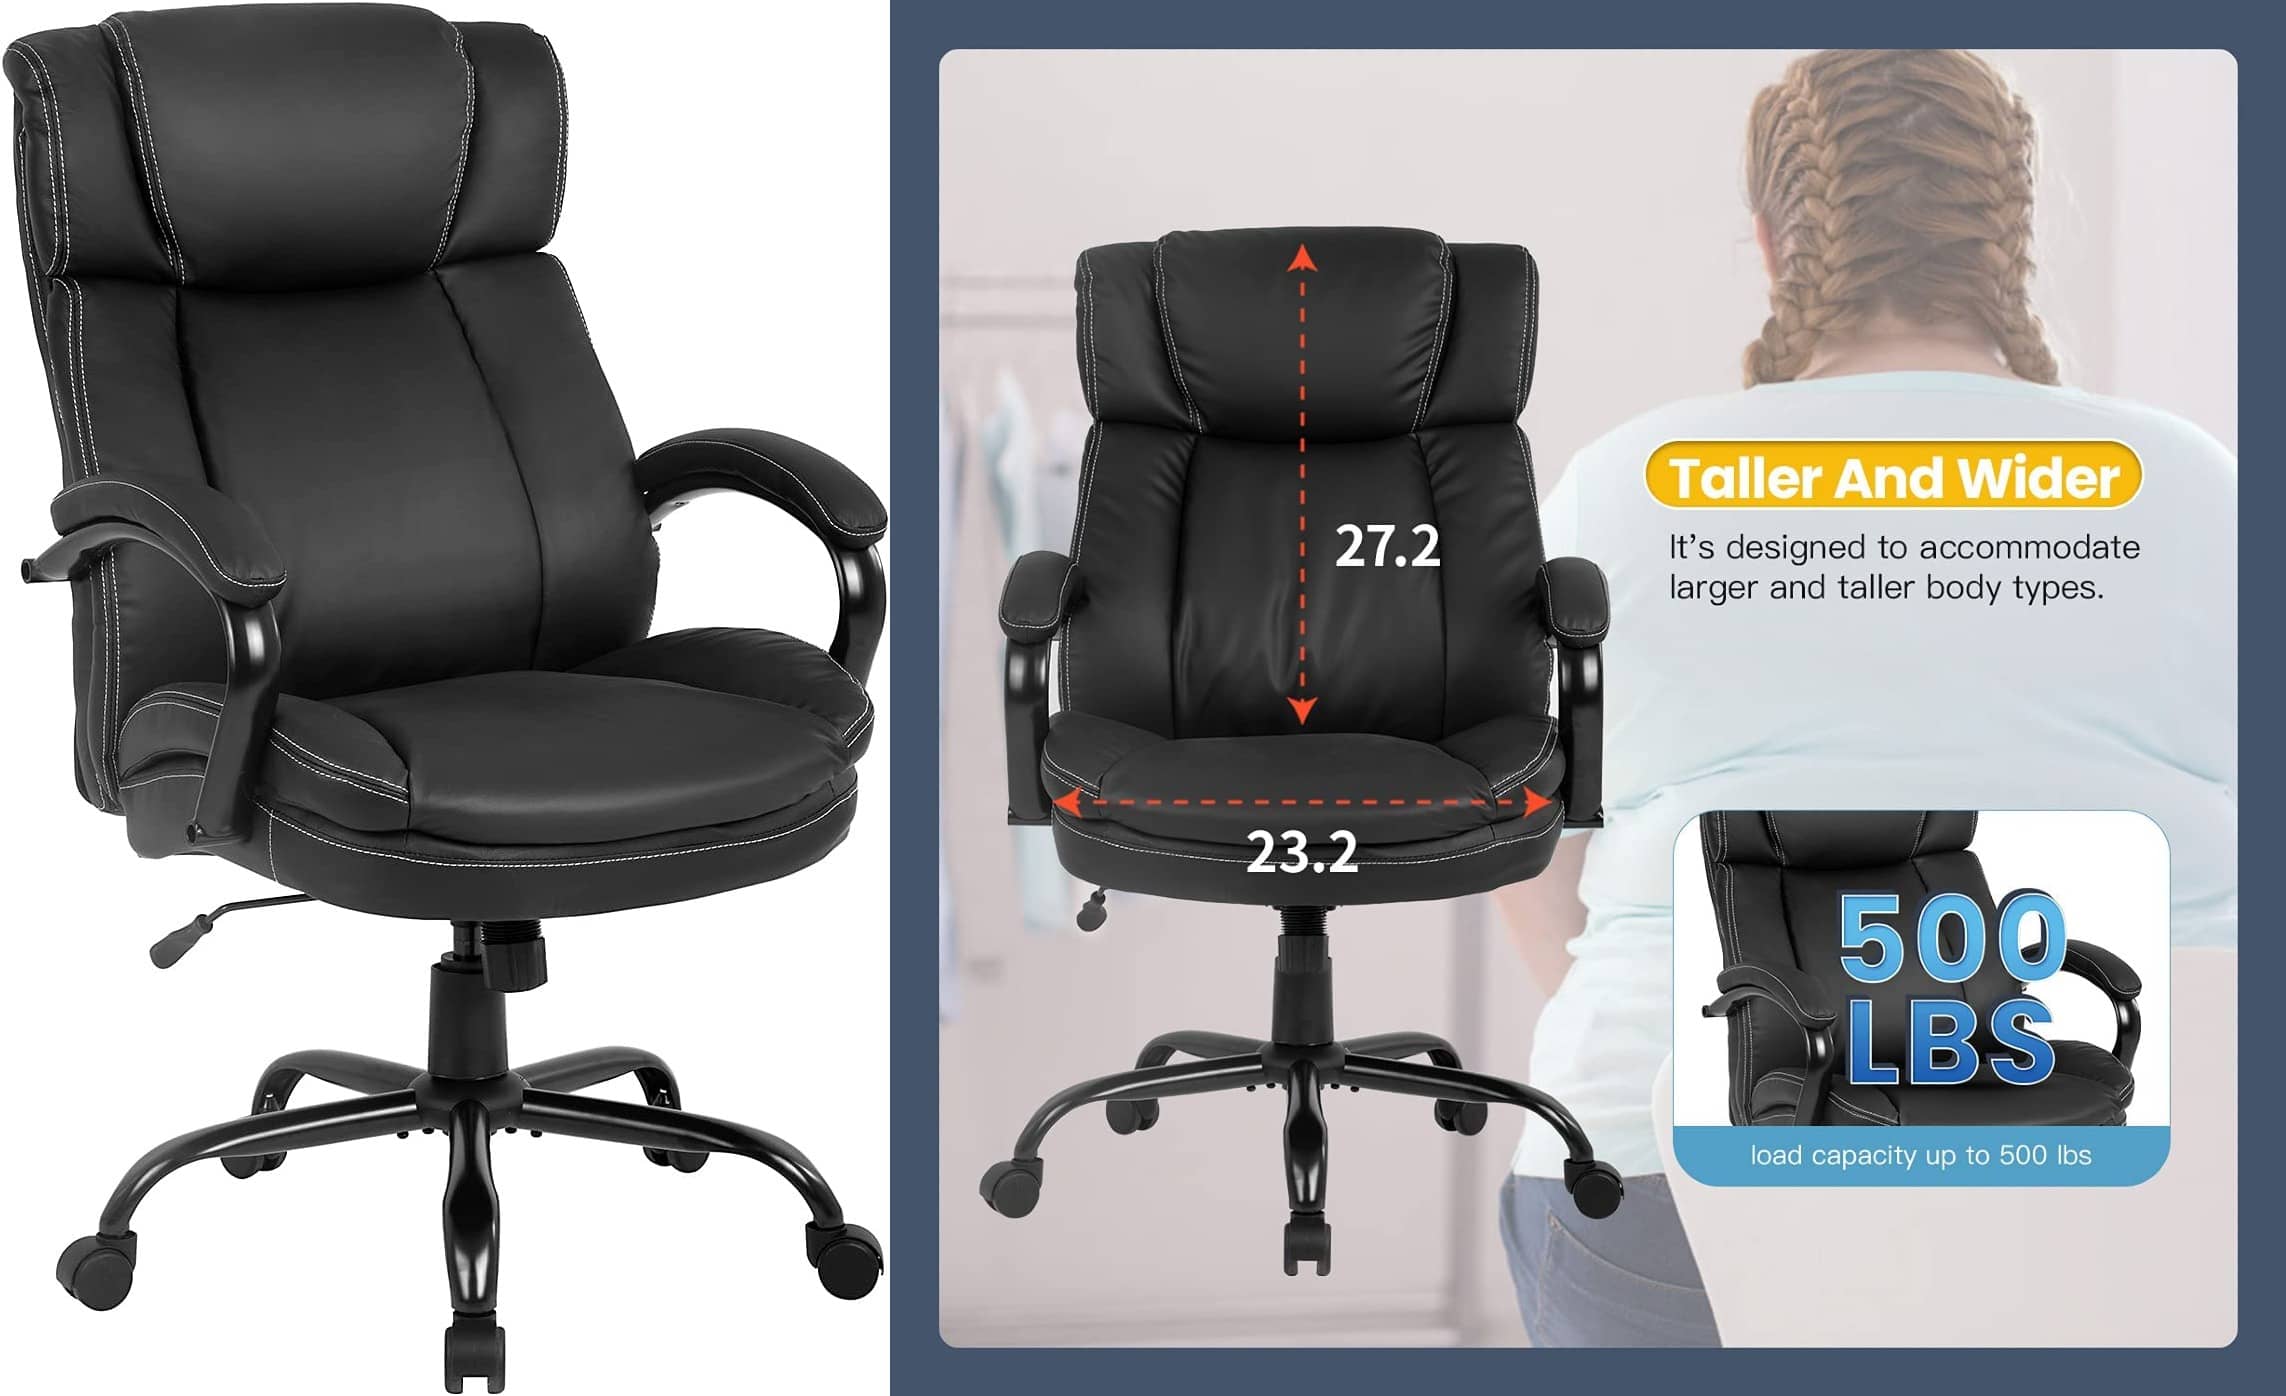 BestOffice Big and Tall Office Chair